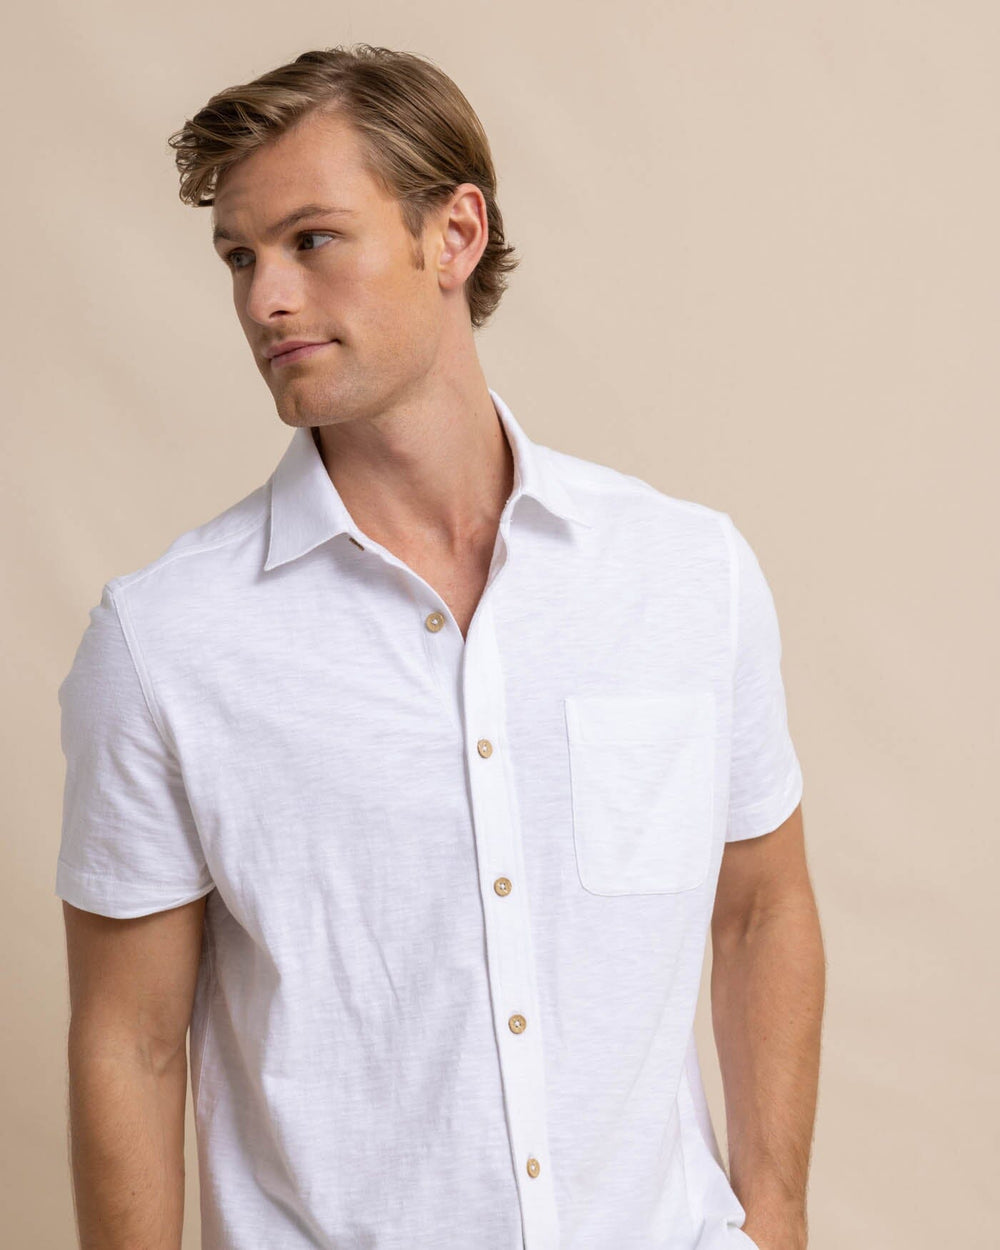 The front view of the Southern Tide Beachcast Solid Knit Short Sleeve Sport Shirt by Southern Tide - Classic White